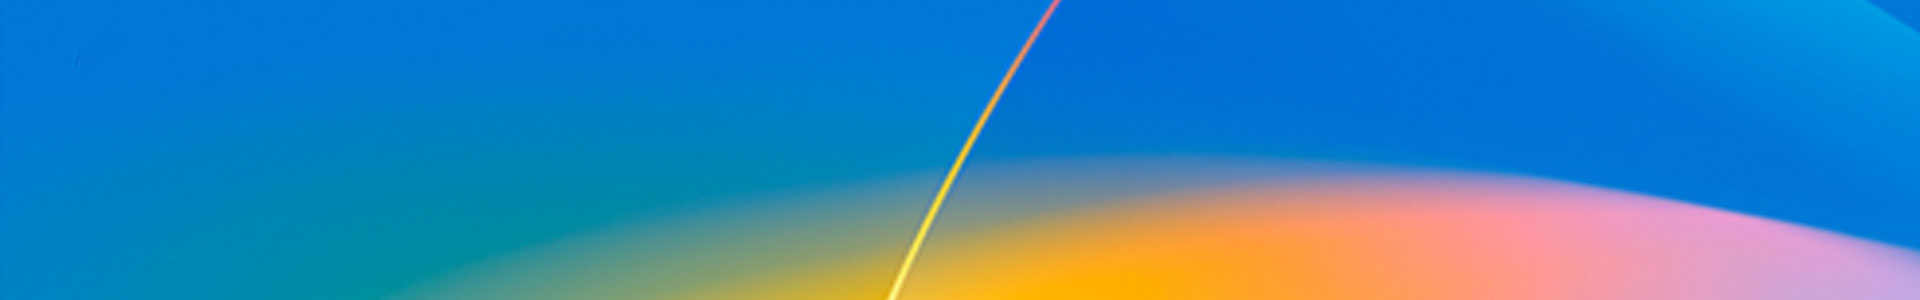 A vibrant abstract artwork featuring a gradient blend of blue, green, and orange hues, intersected by a thin, bright diagonal line. 